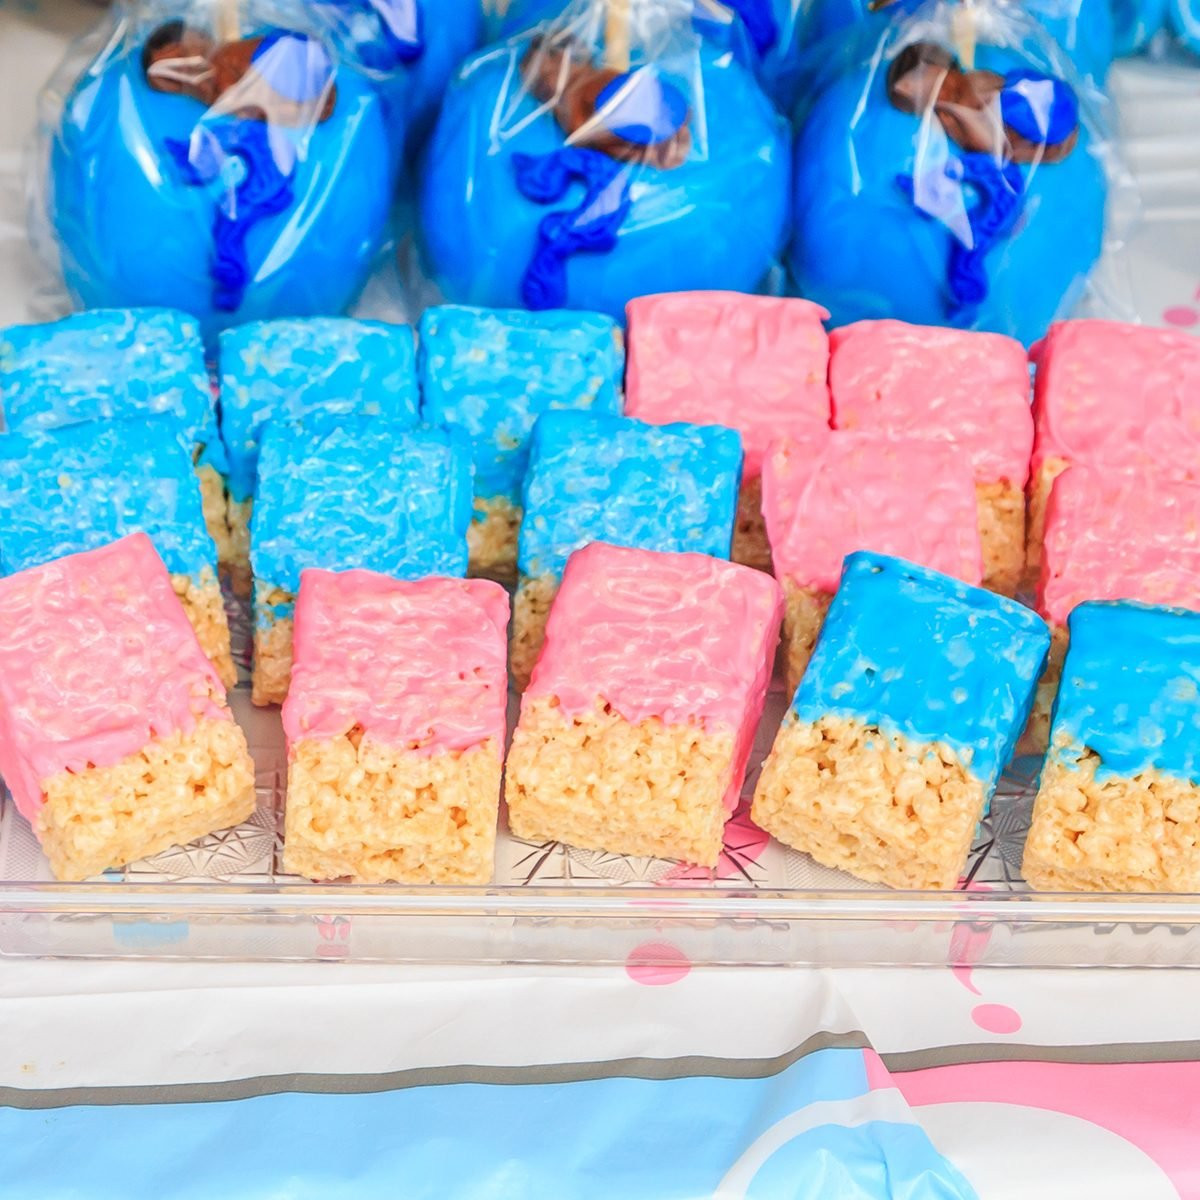 Gender Party Food Ideas
 The Cutest Gender Reveal Party Food Ideas